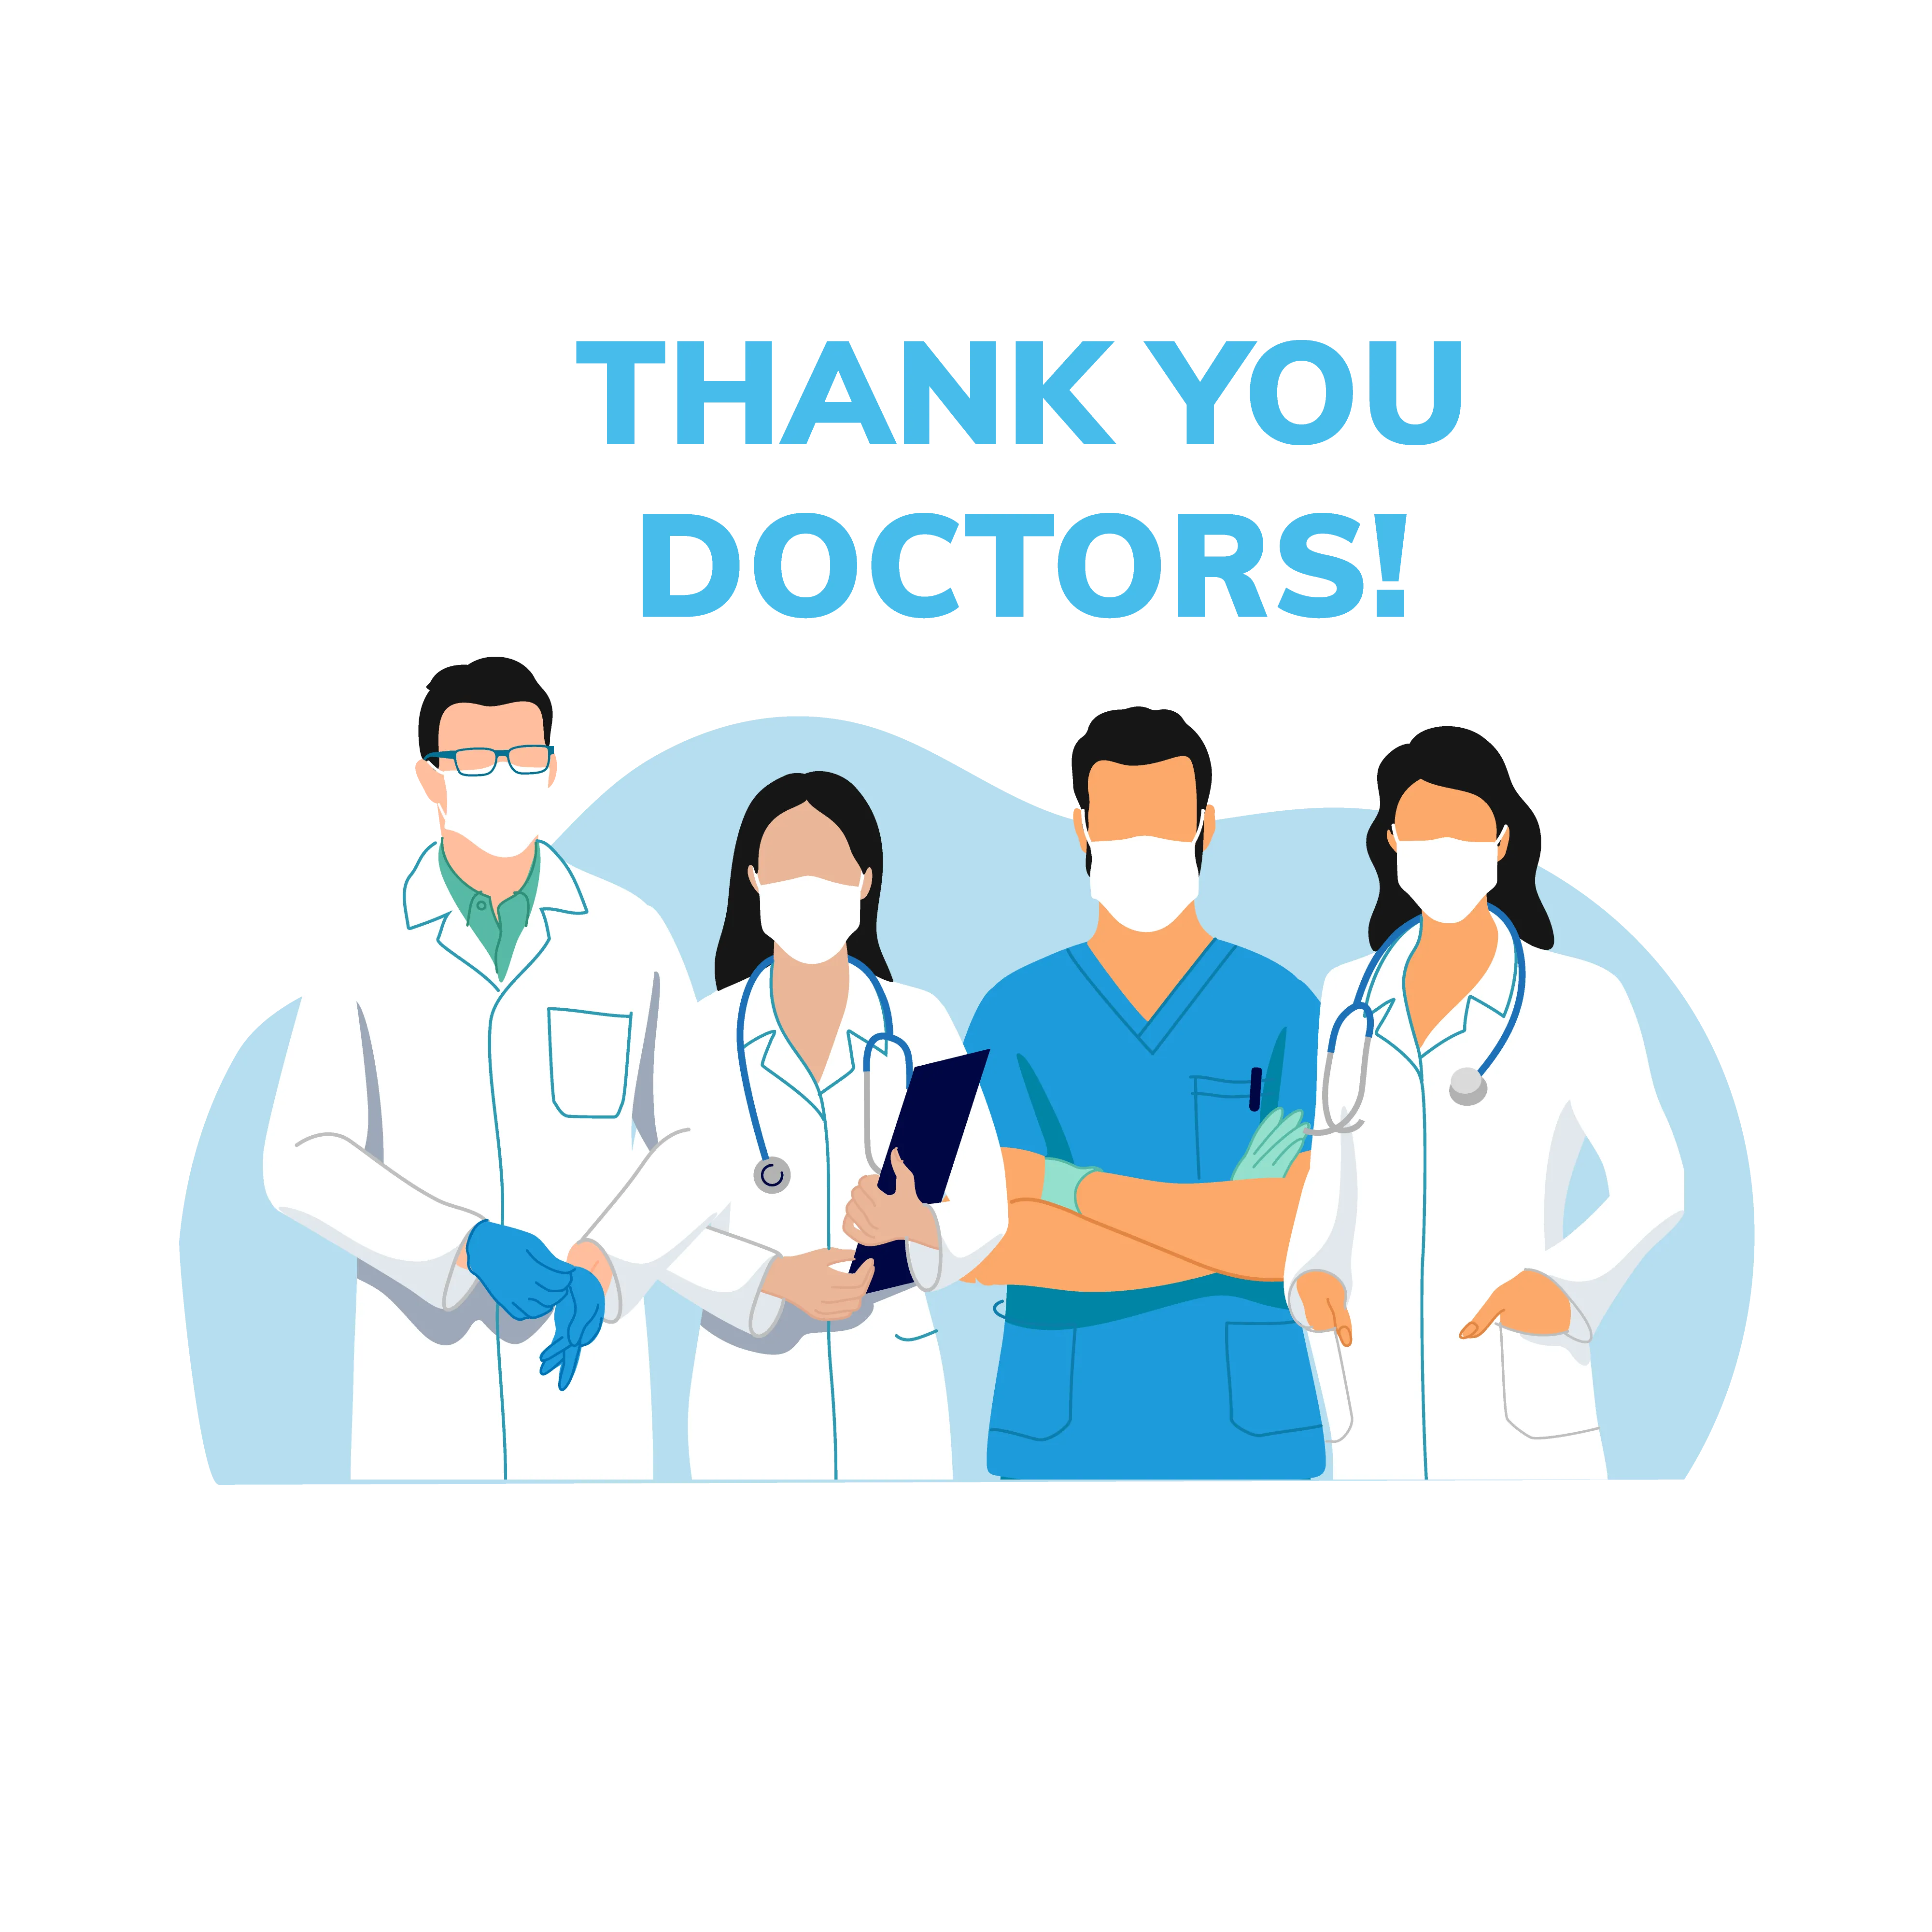 thank you doctor